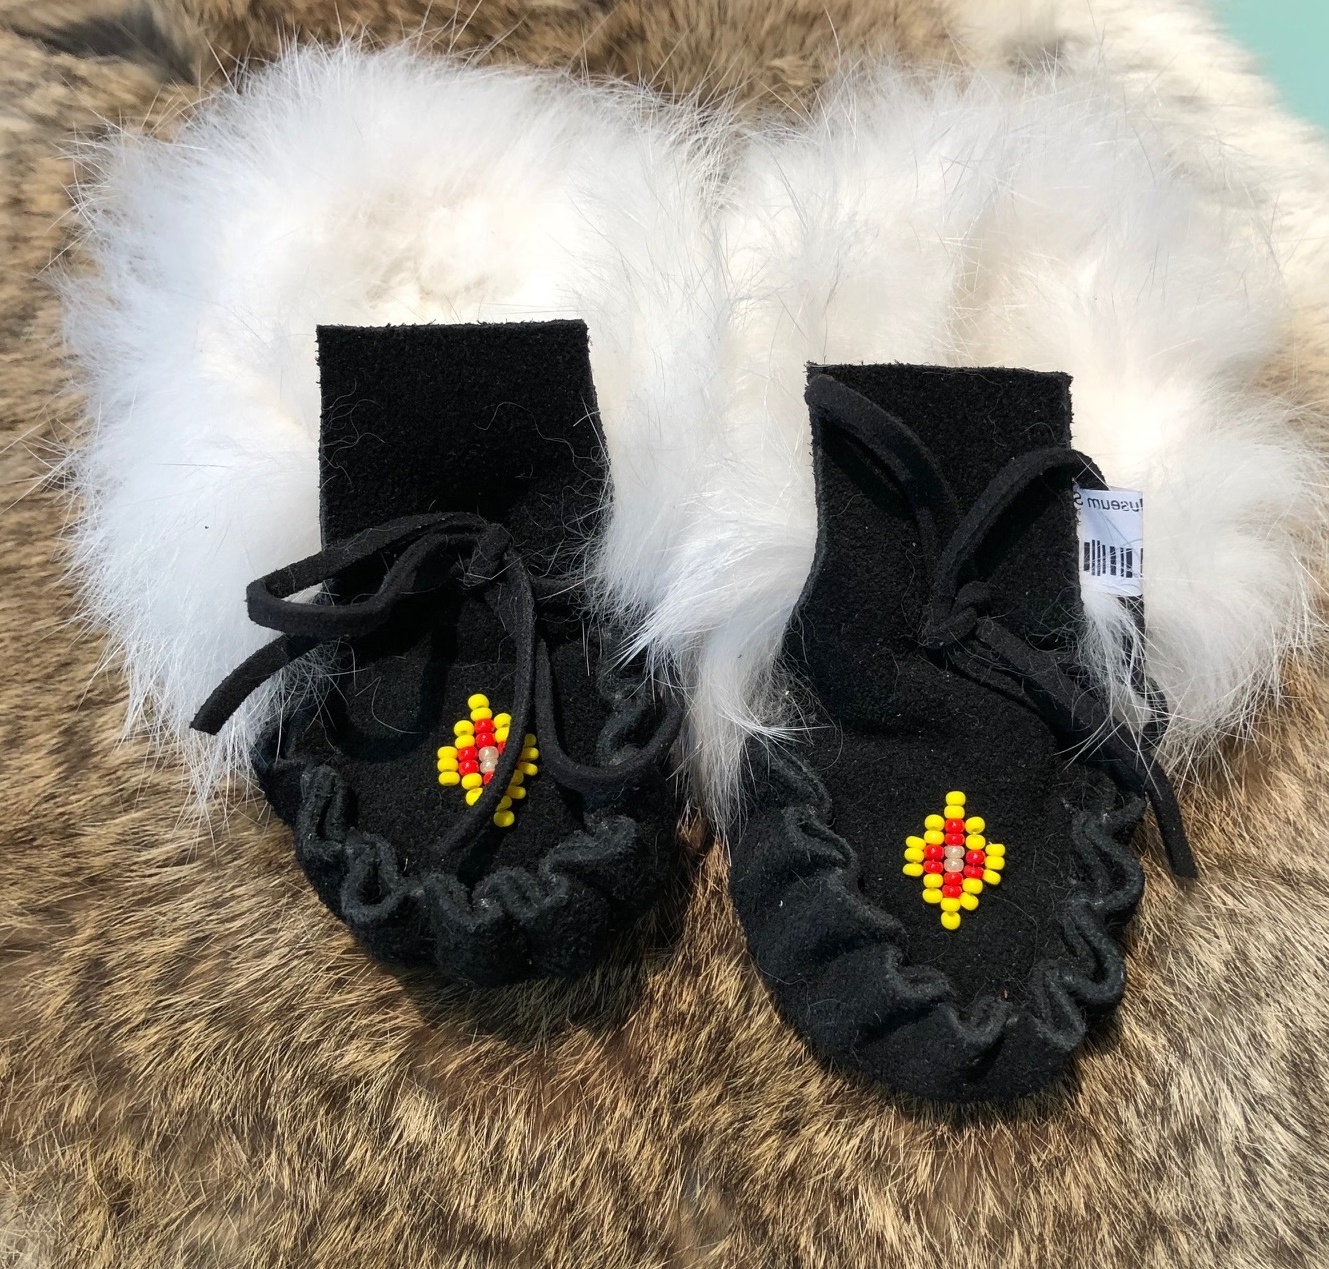 baby moccasins with fur